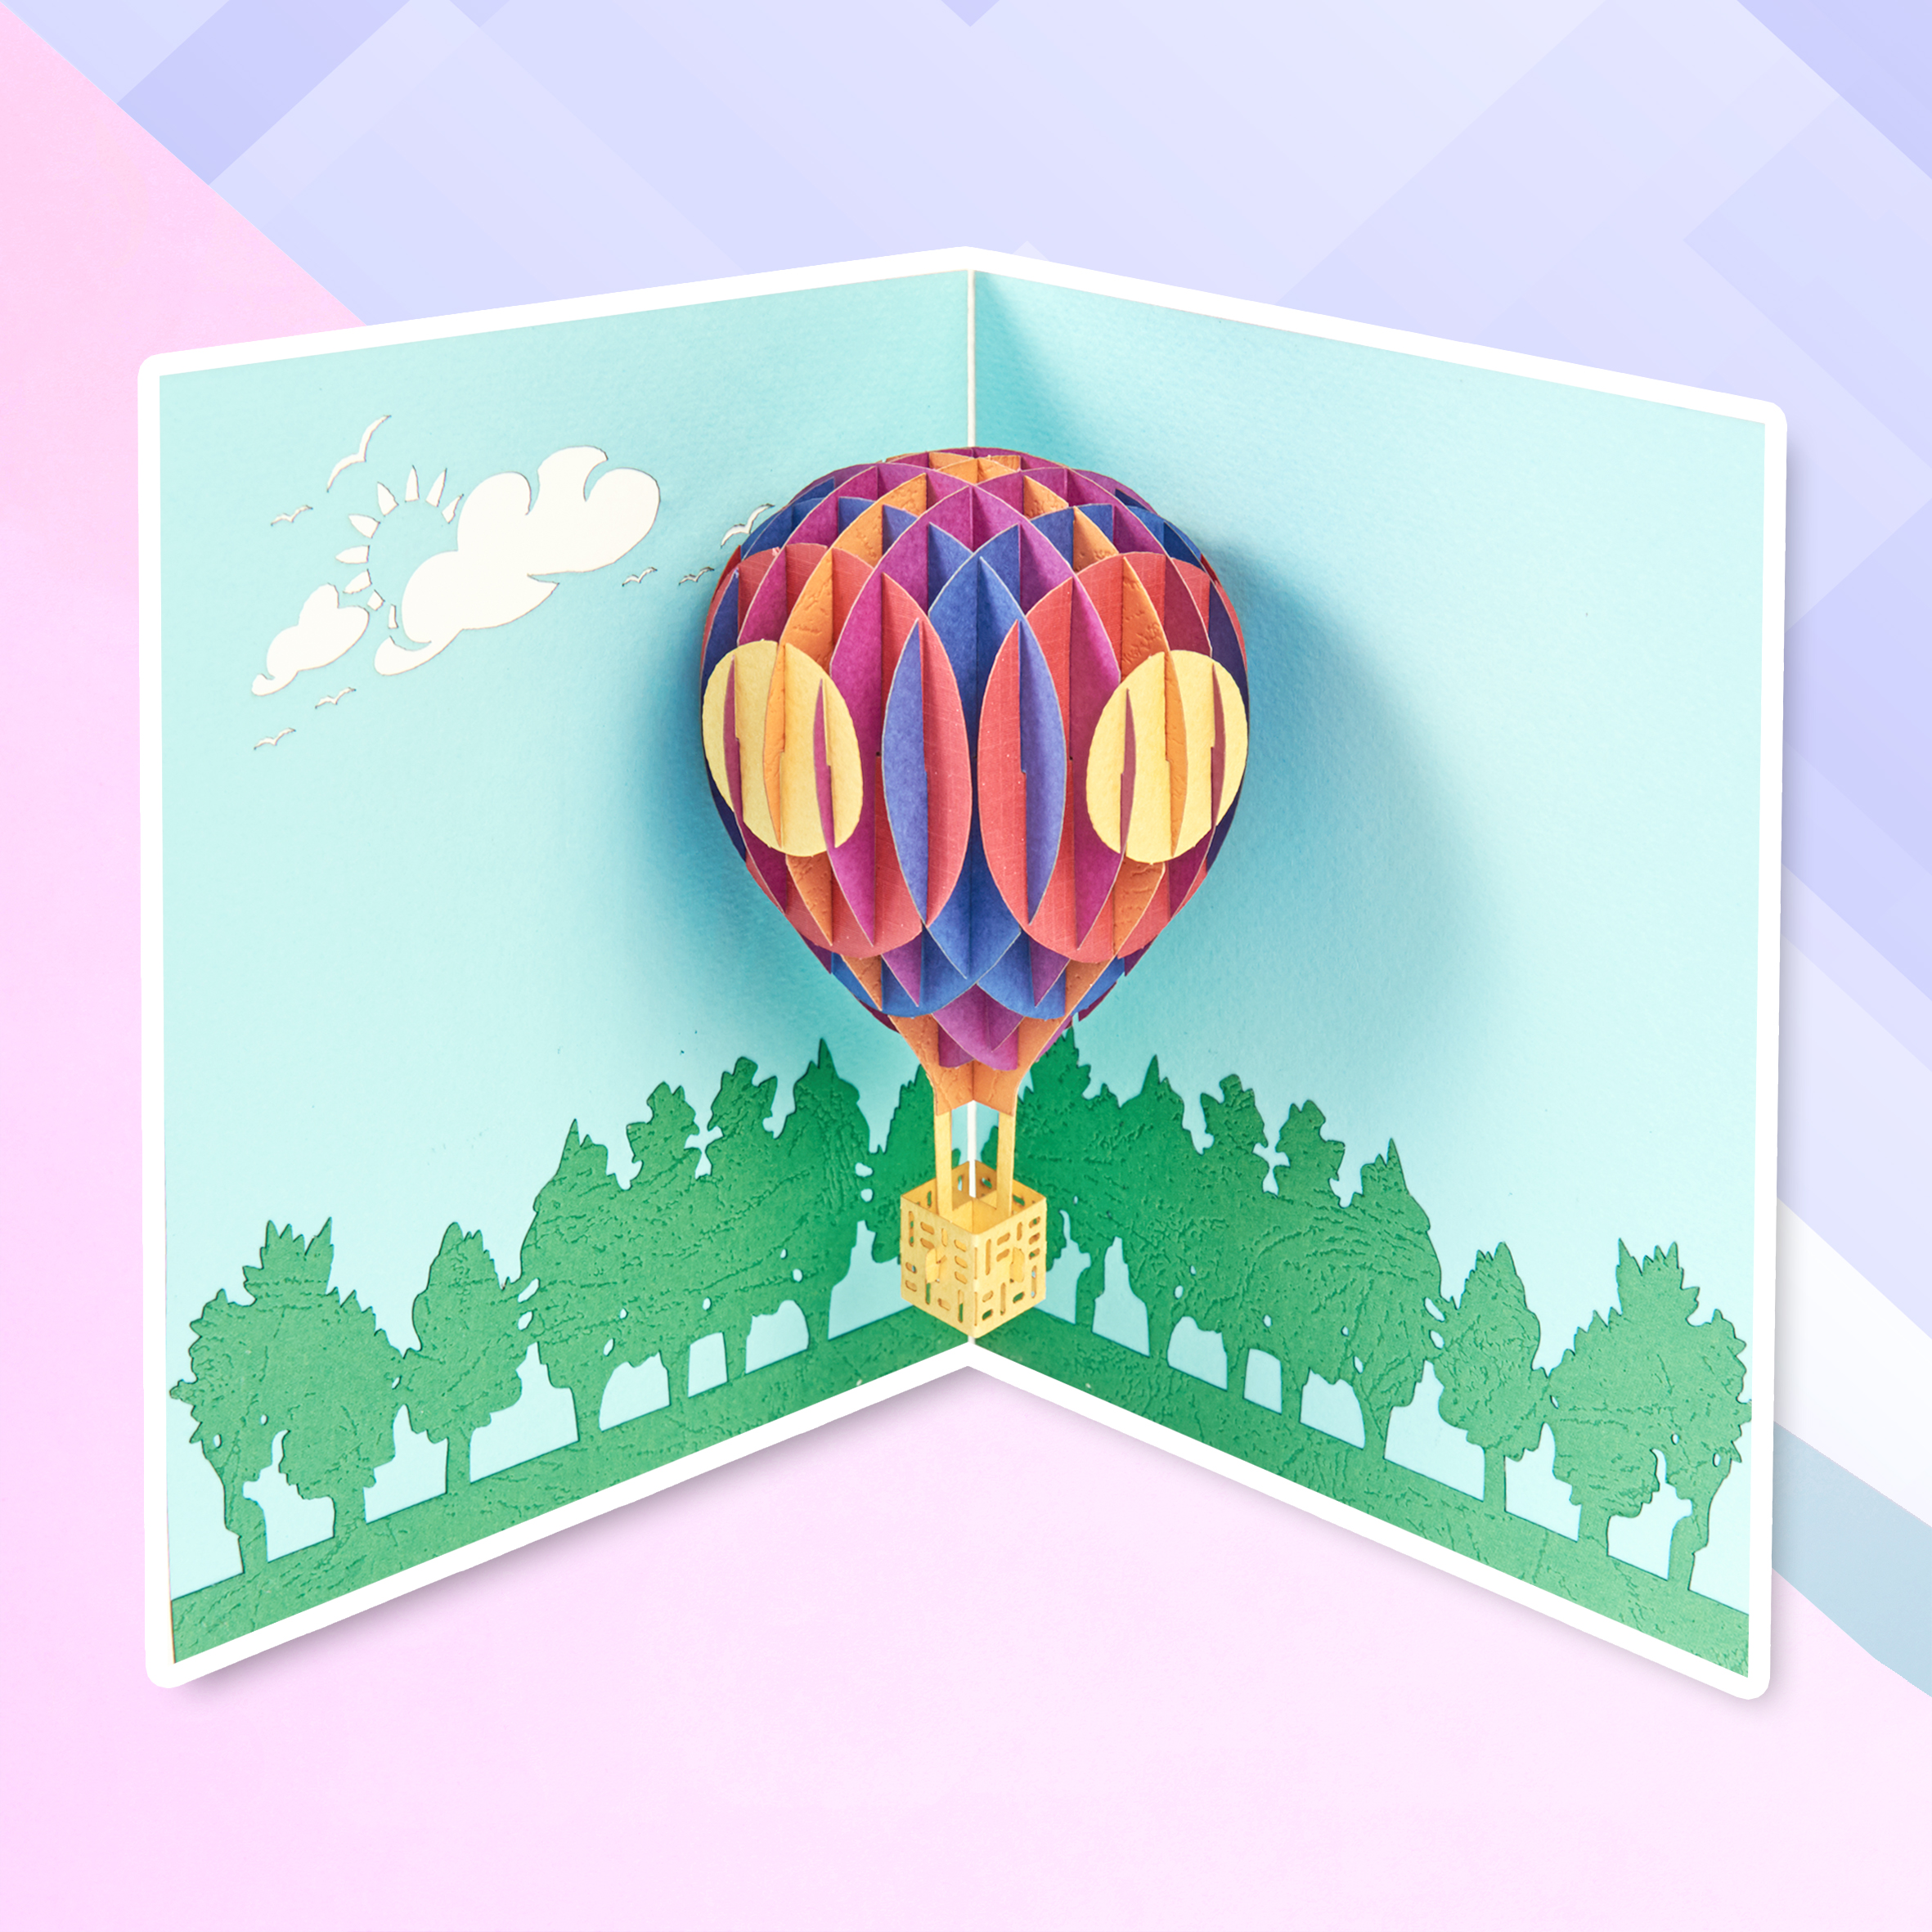 Lot of 2x 3D Paper Greeting Card Carving Pop Up ~ Hot Air Ballon ~ Gifts 